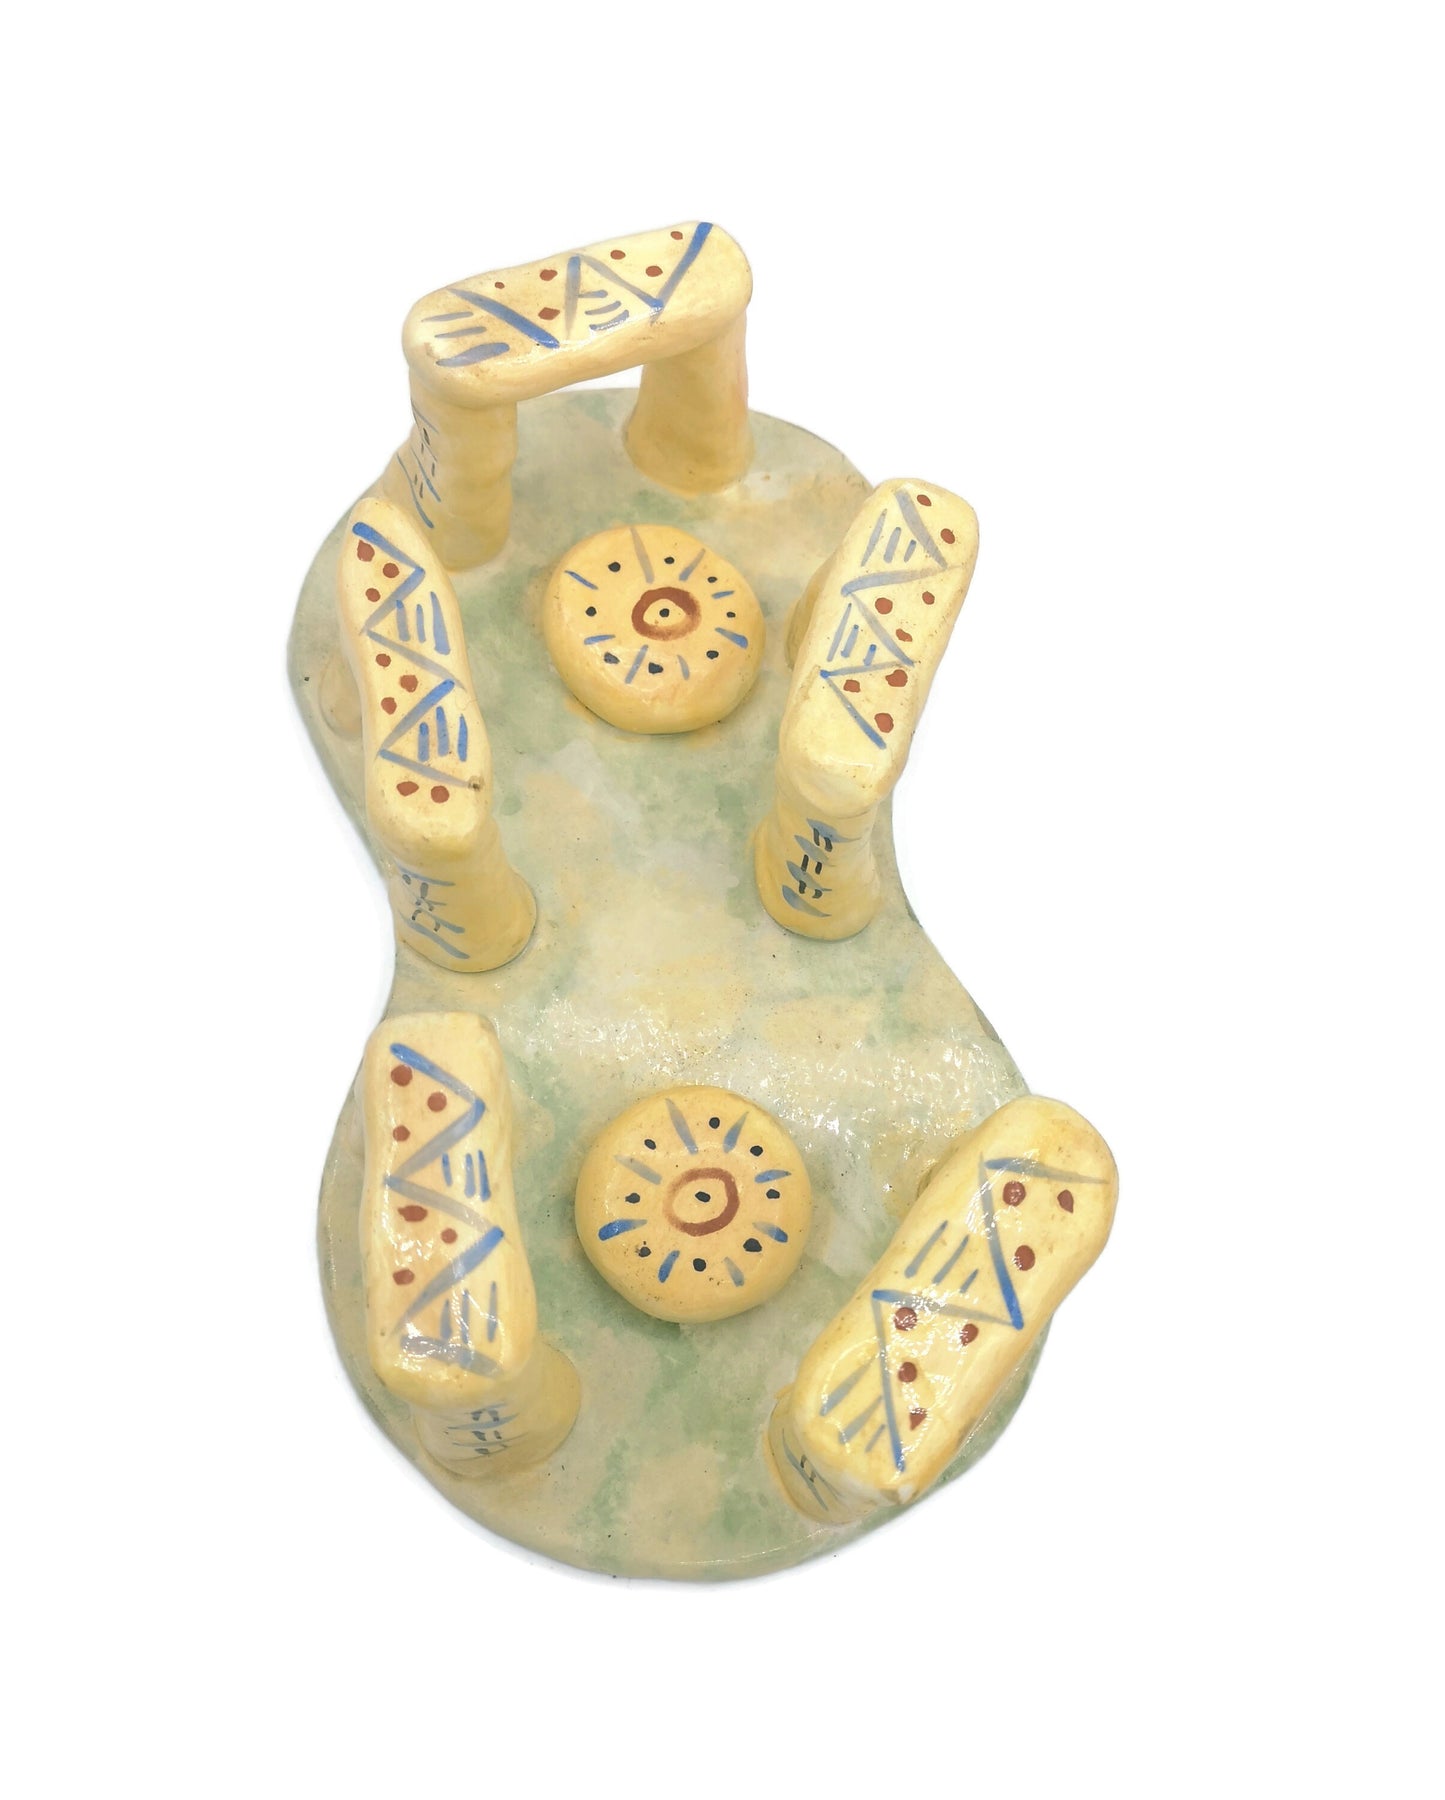 Handmade Ceramic Sculpture Inspired by Megalithic Monuments | Unique Home Decor | Gift for Creative People - Ceramica Ana Rafael